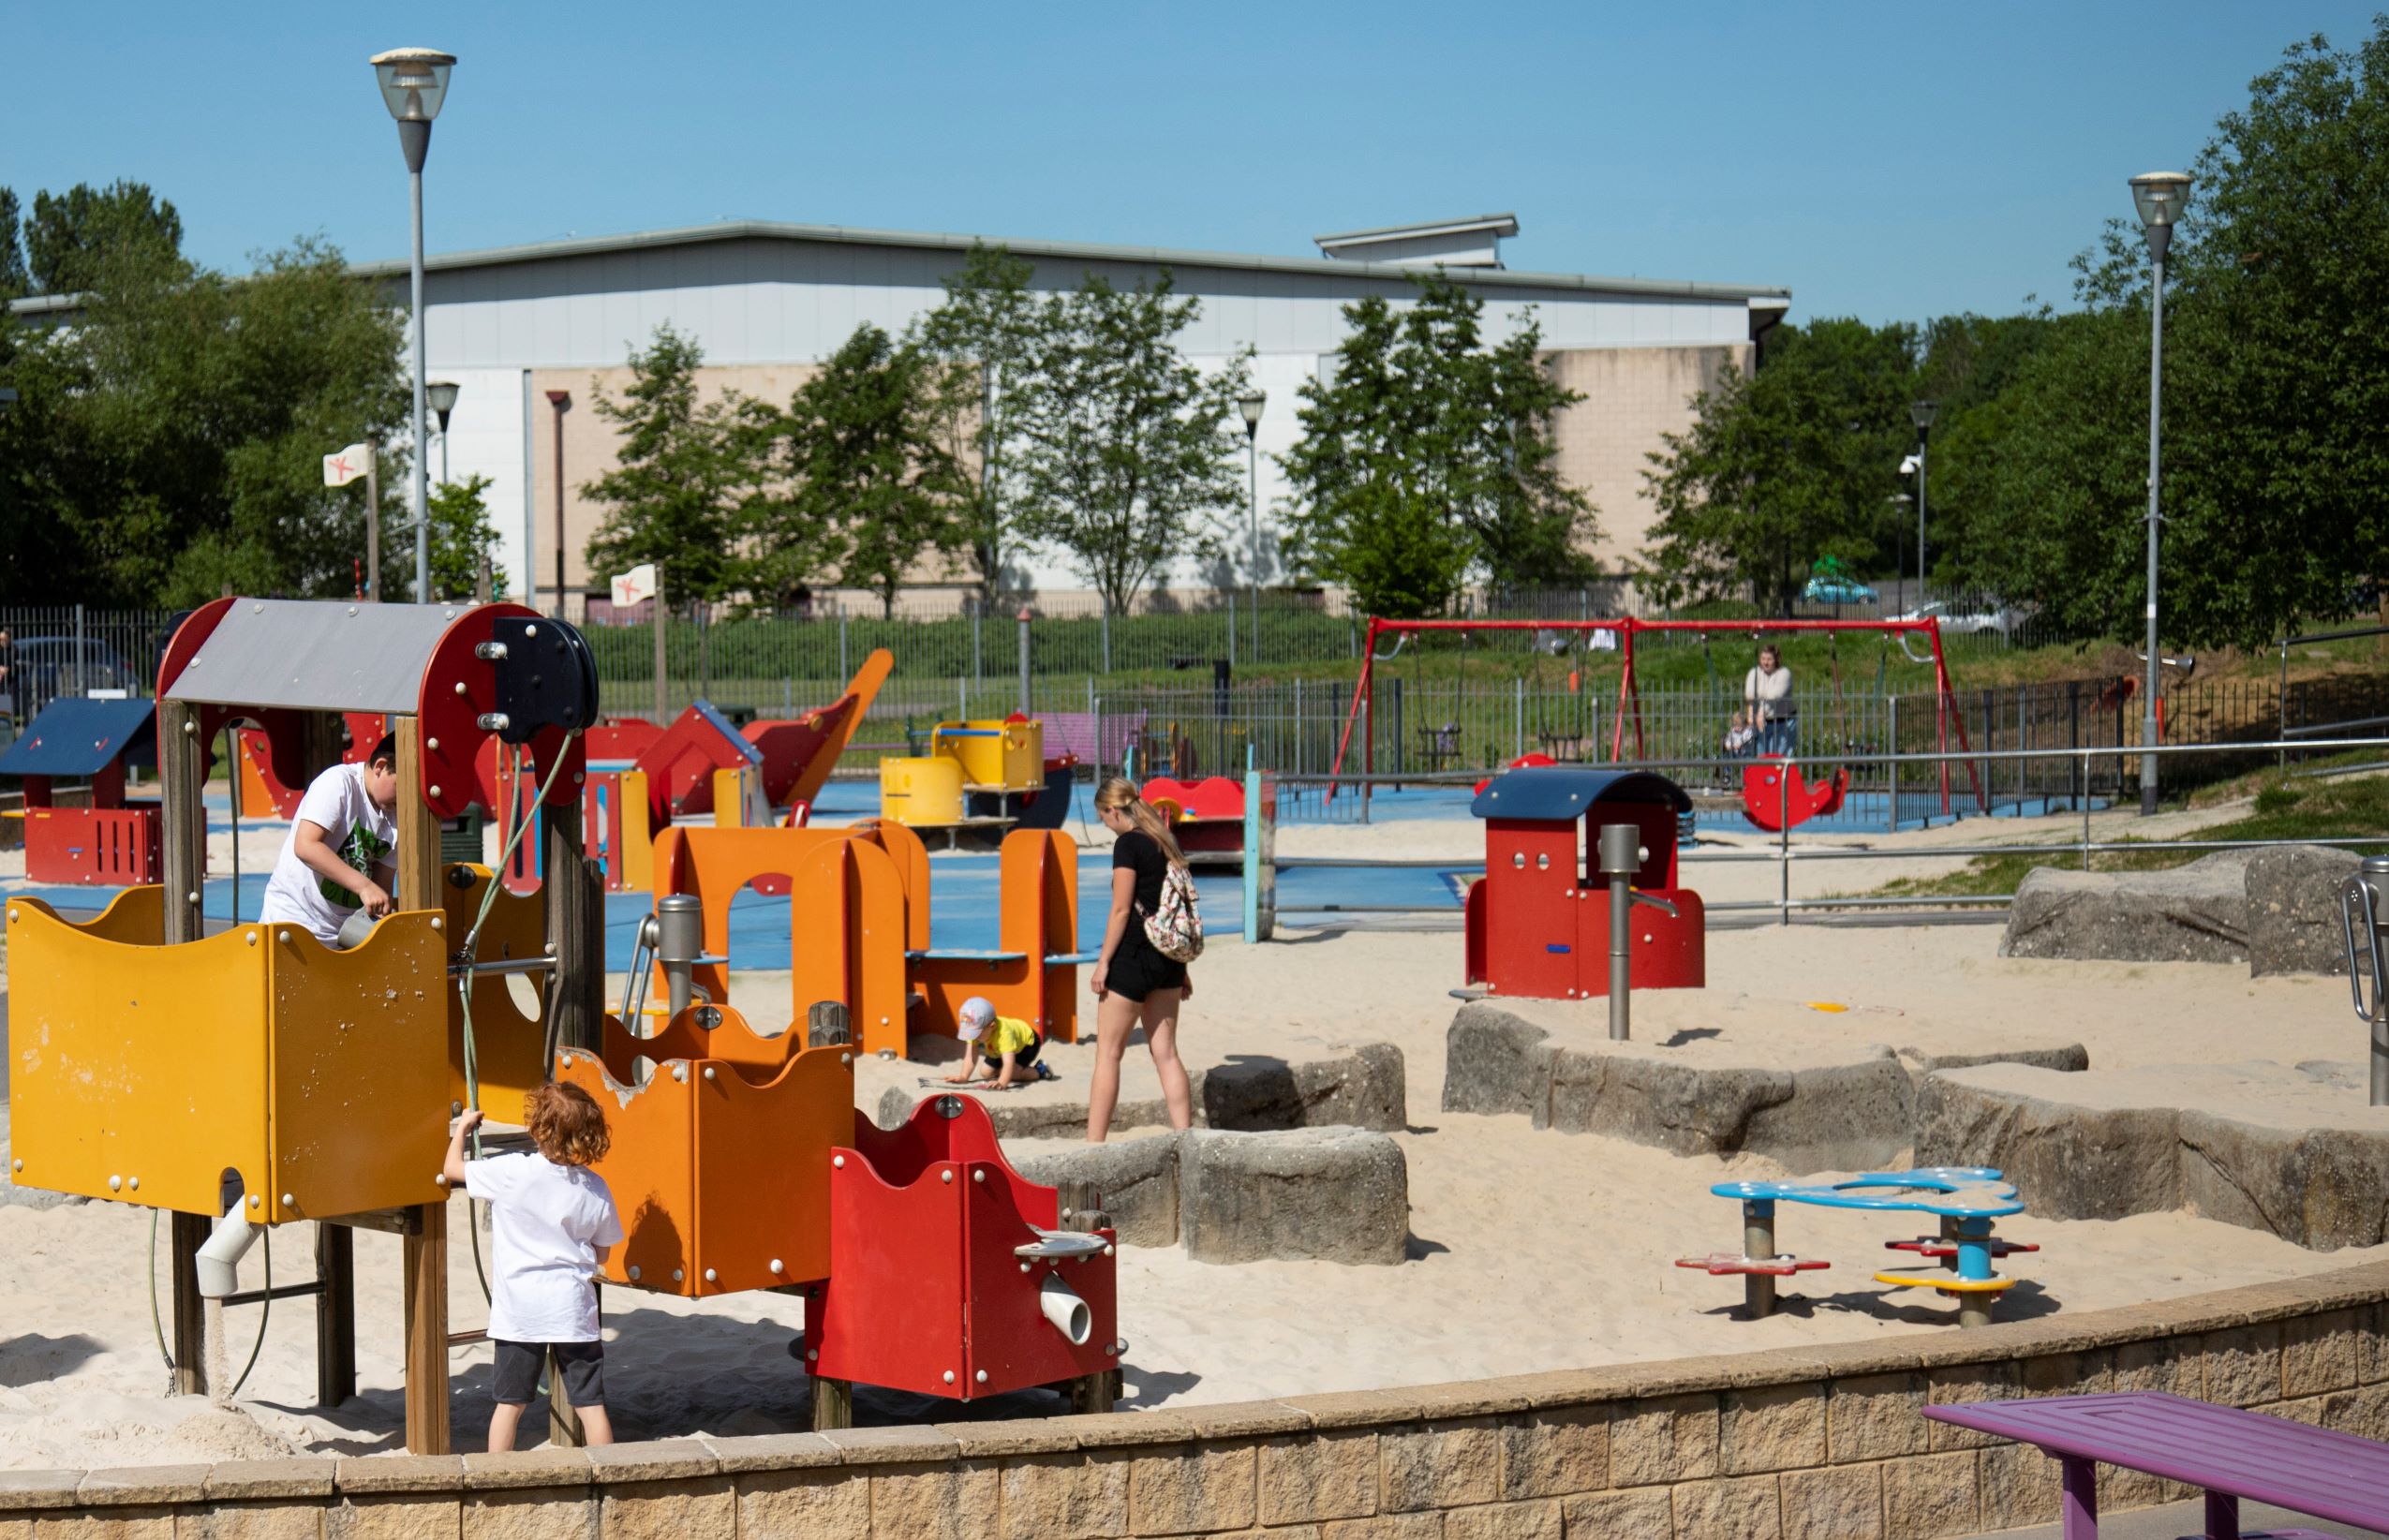 Children's play park with sand pit and climbing apparatus